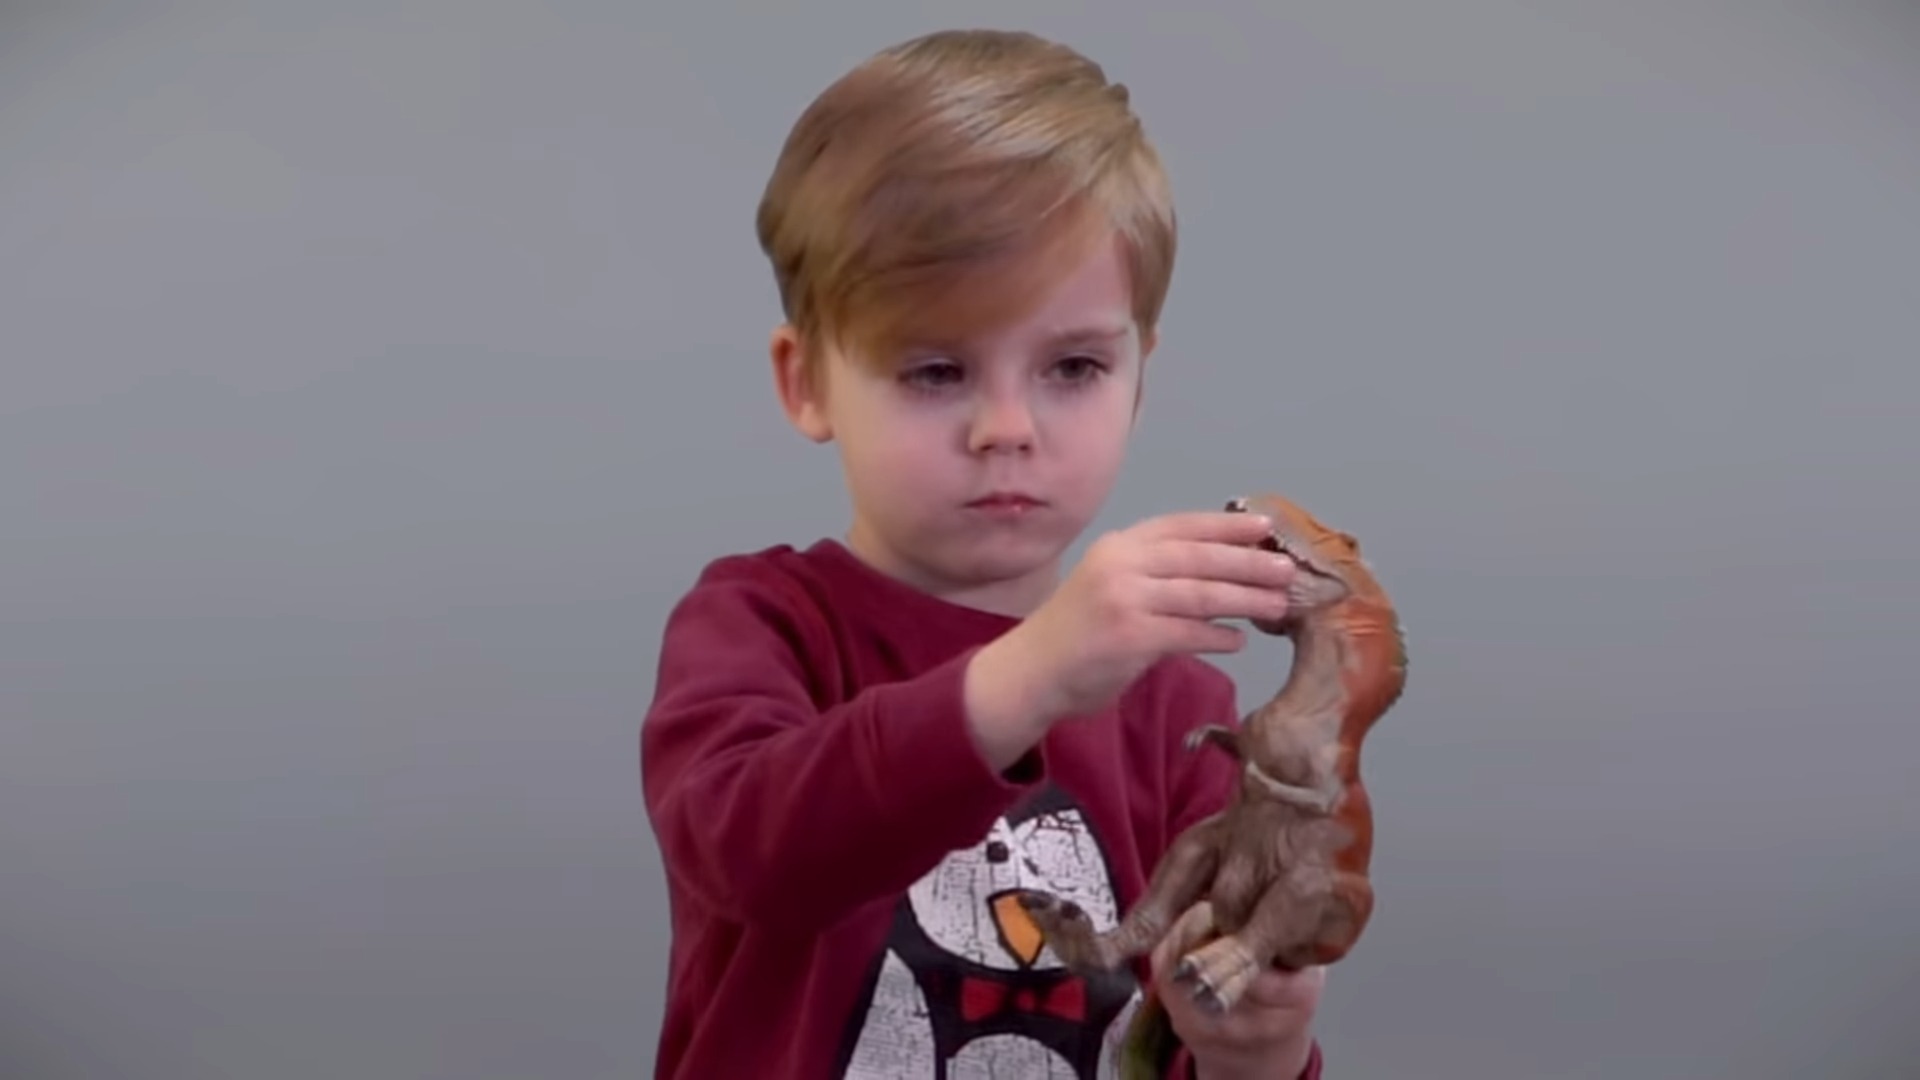 Boy Playing With a Dinosaur